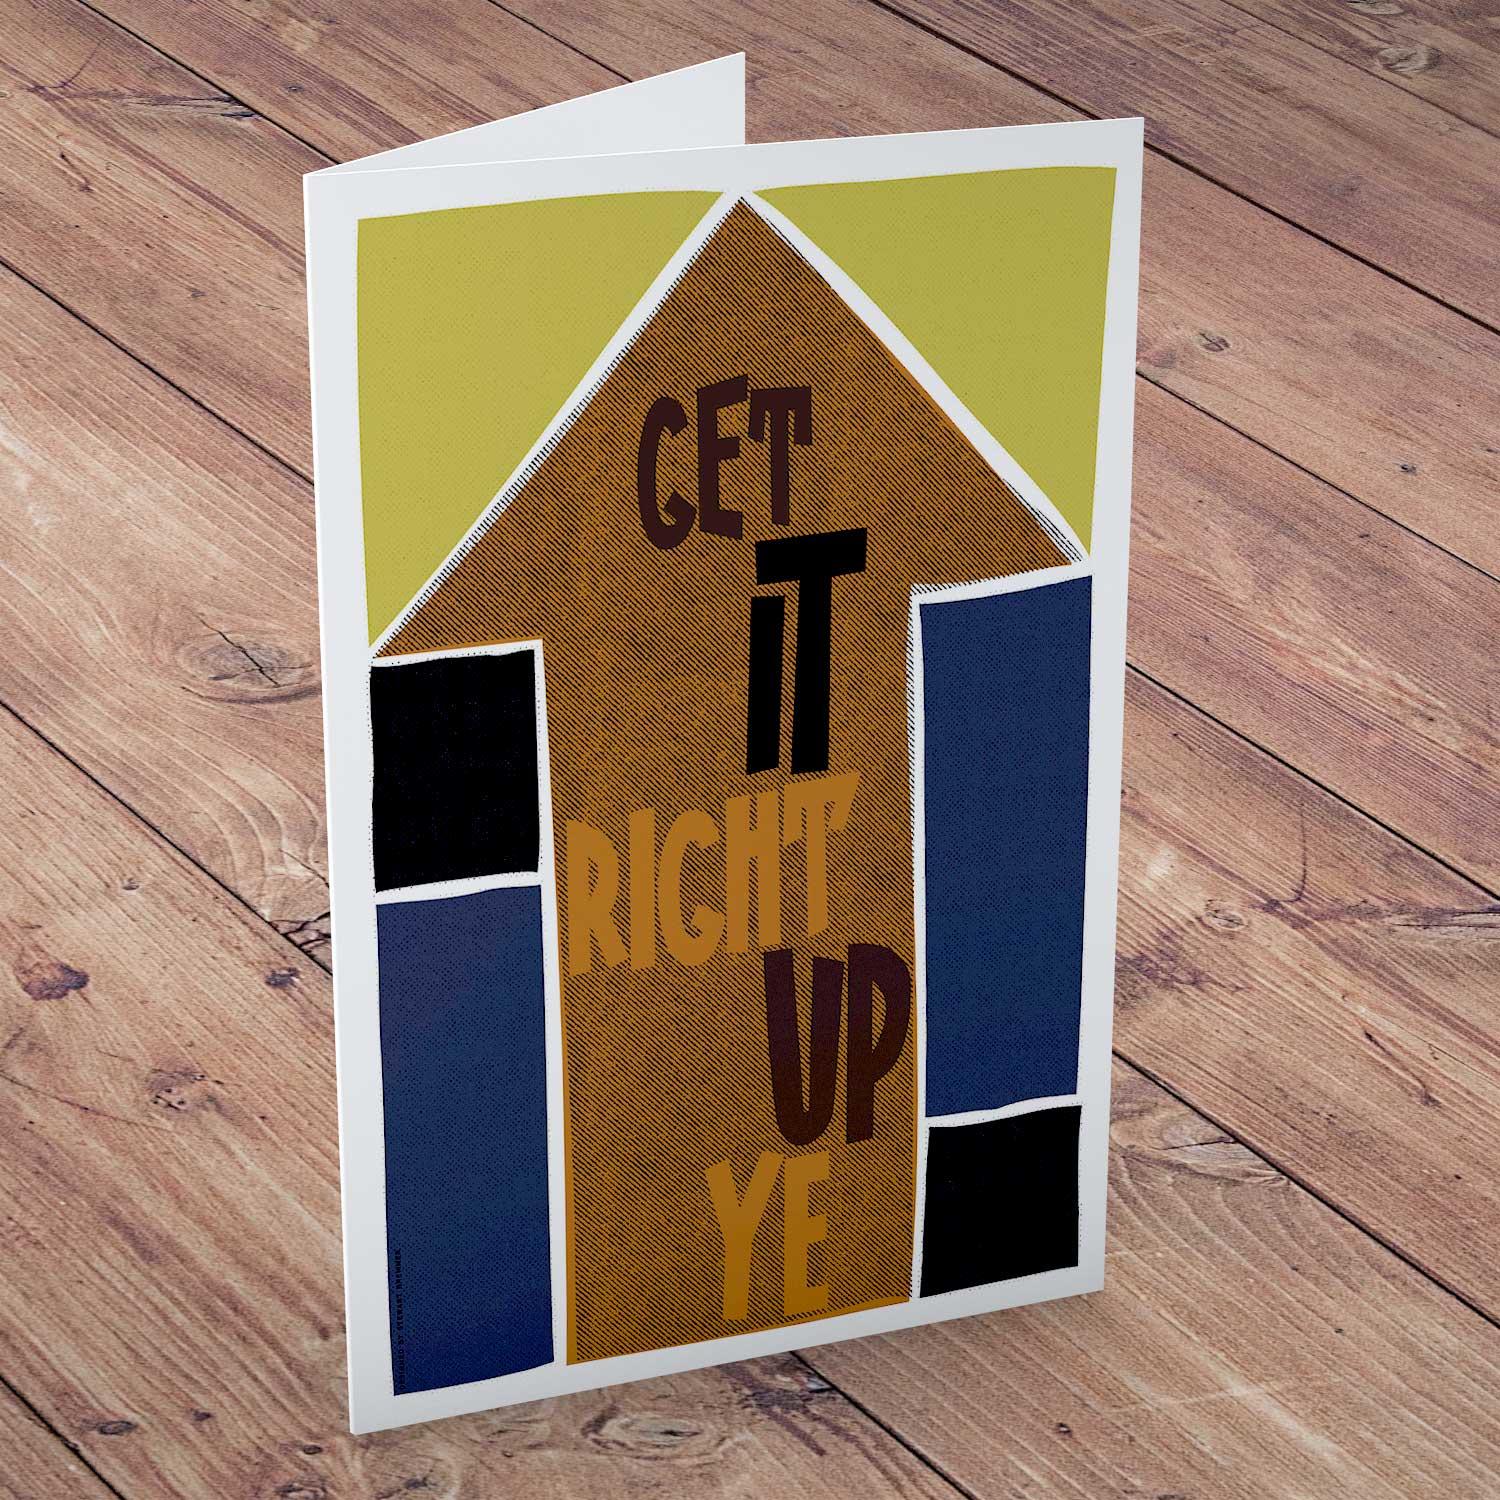 Get it Right Up Ye Greeting Card from an original painting by artist Stewart Bremner